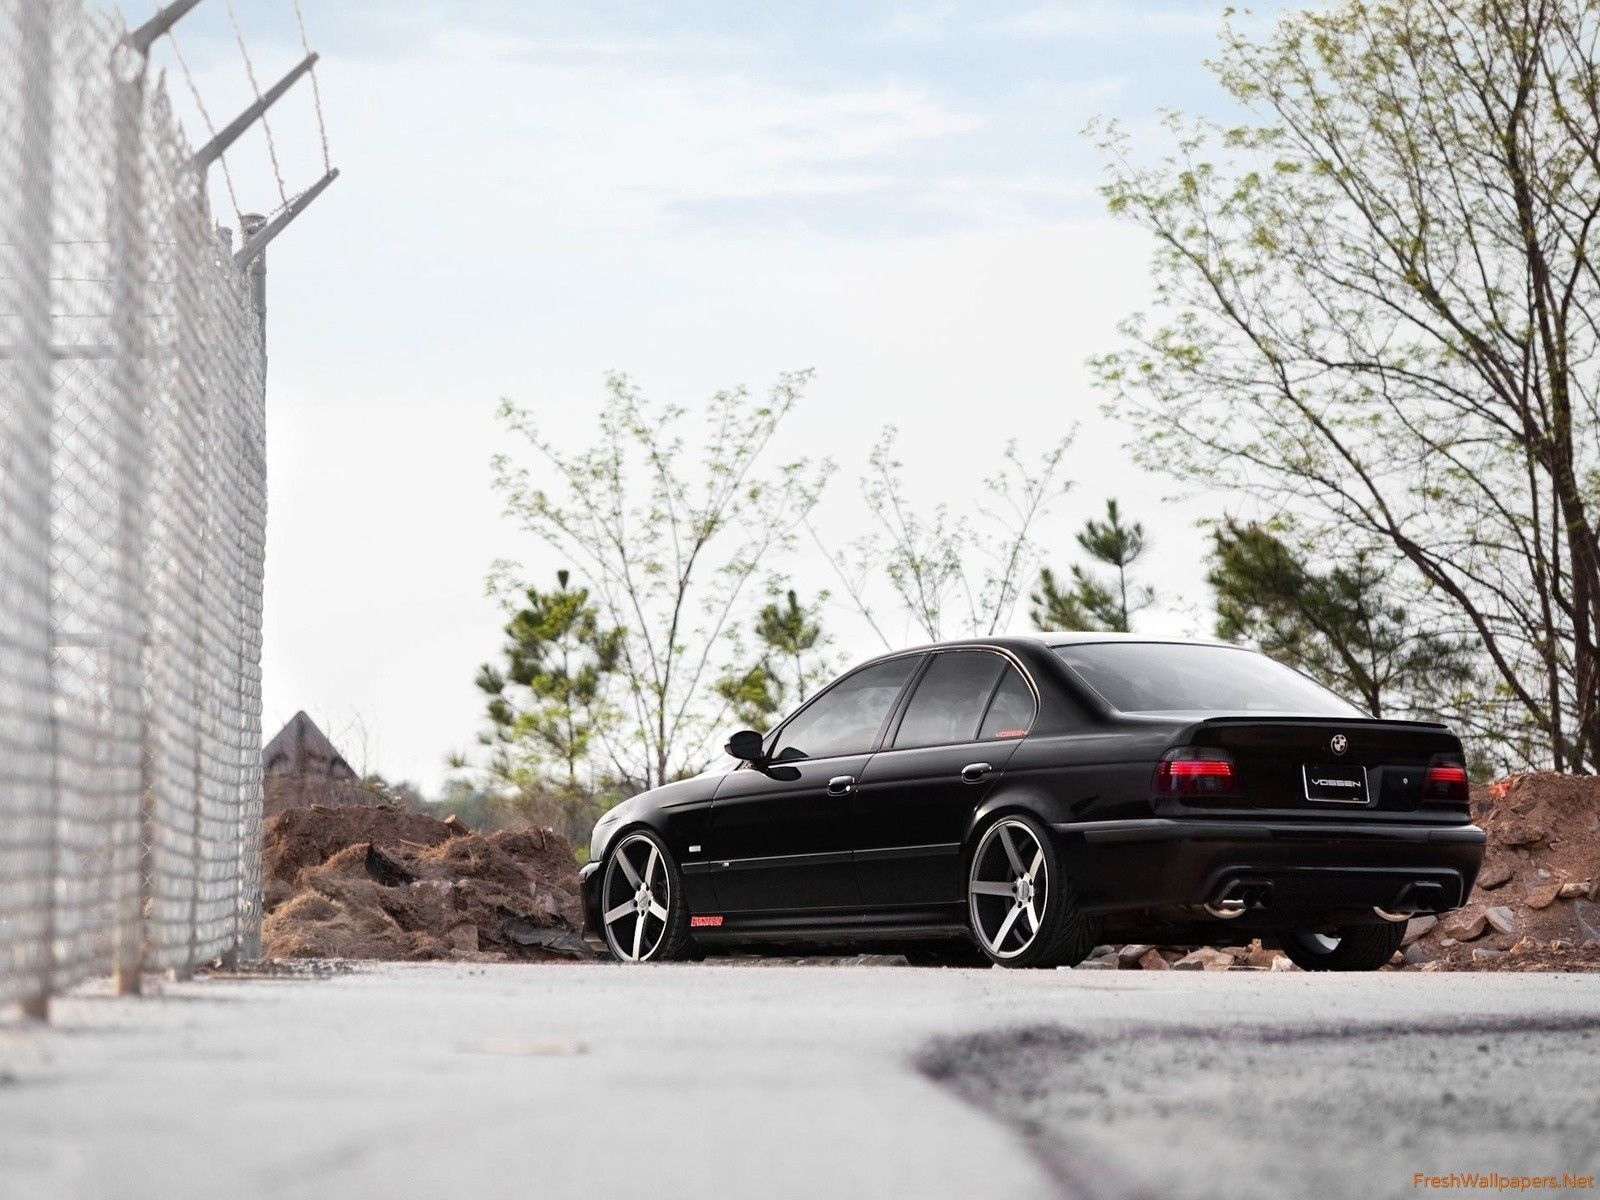 bmw e39 vossen wallpapers | Freshwallpapers